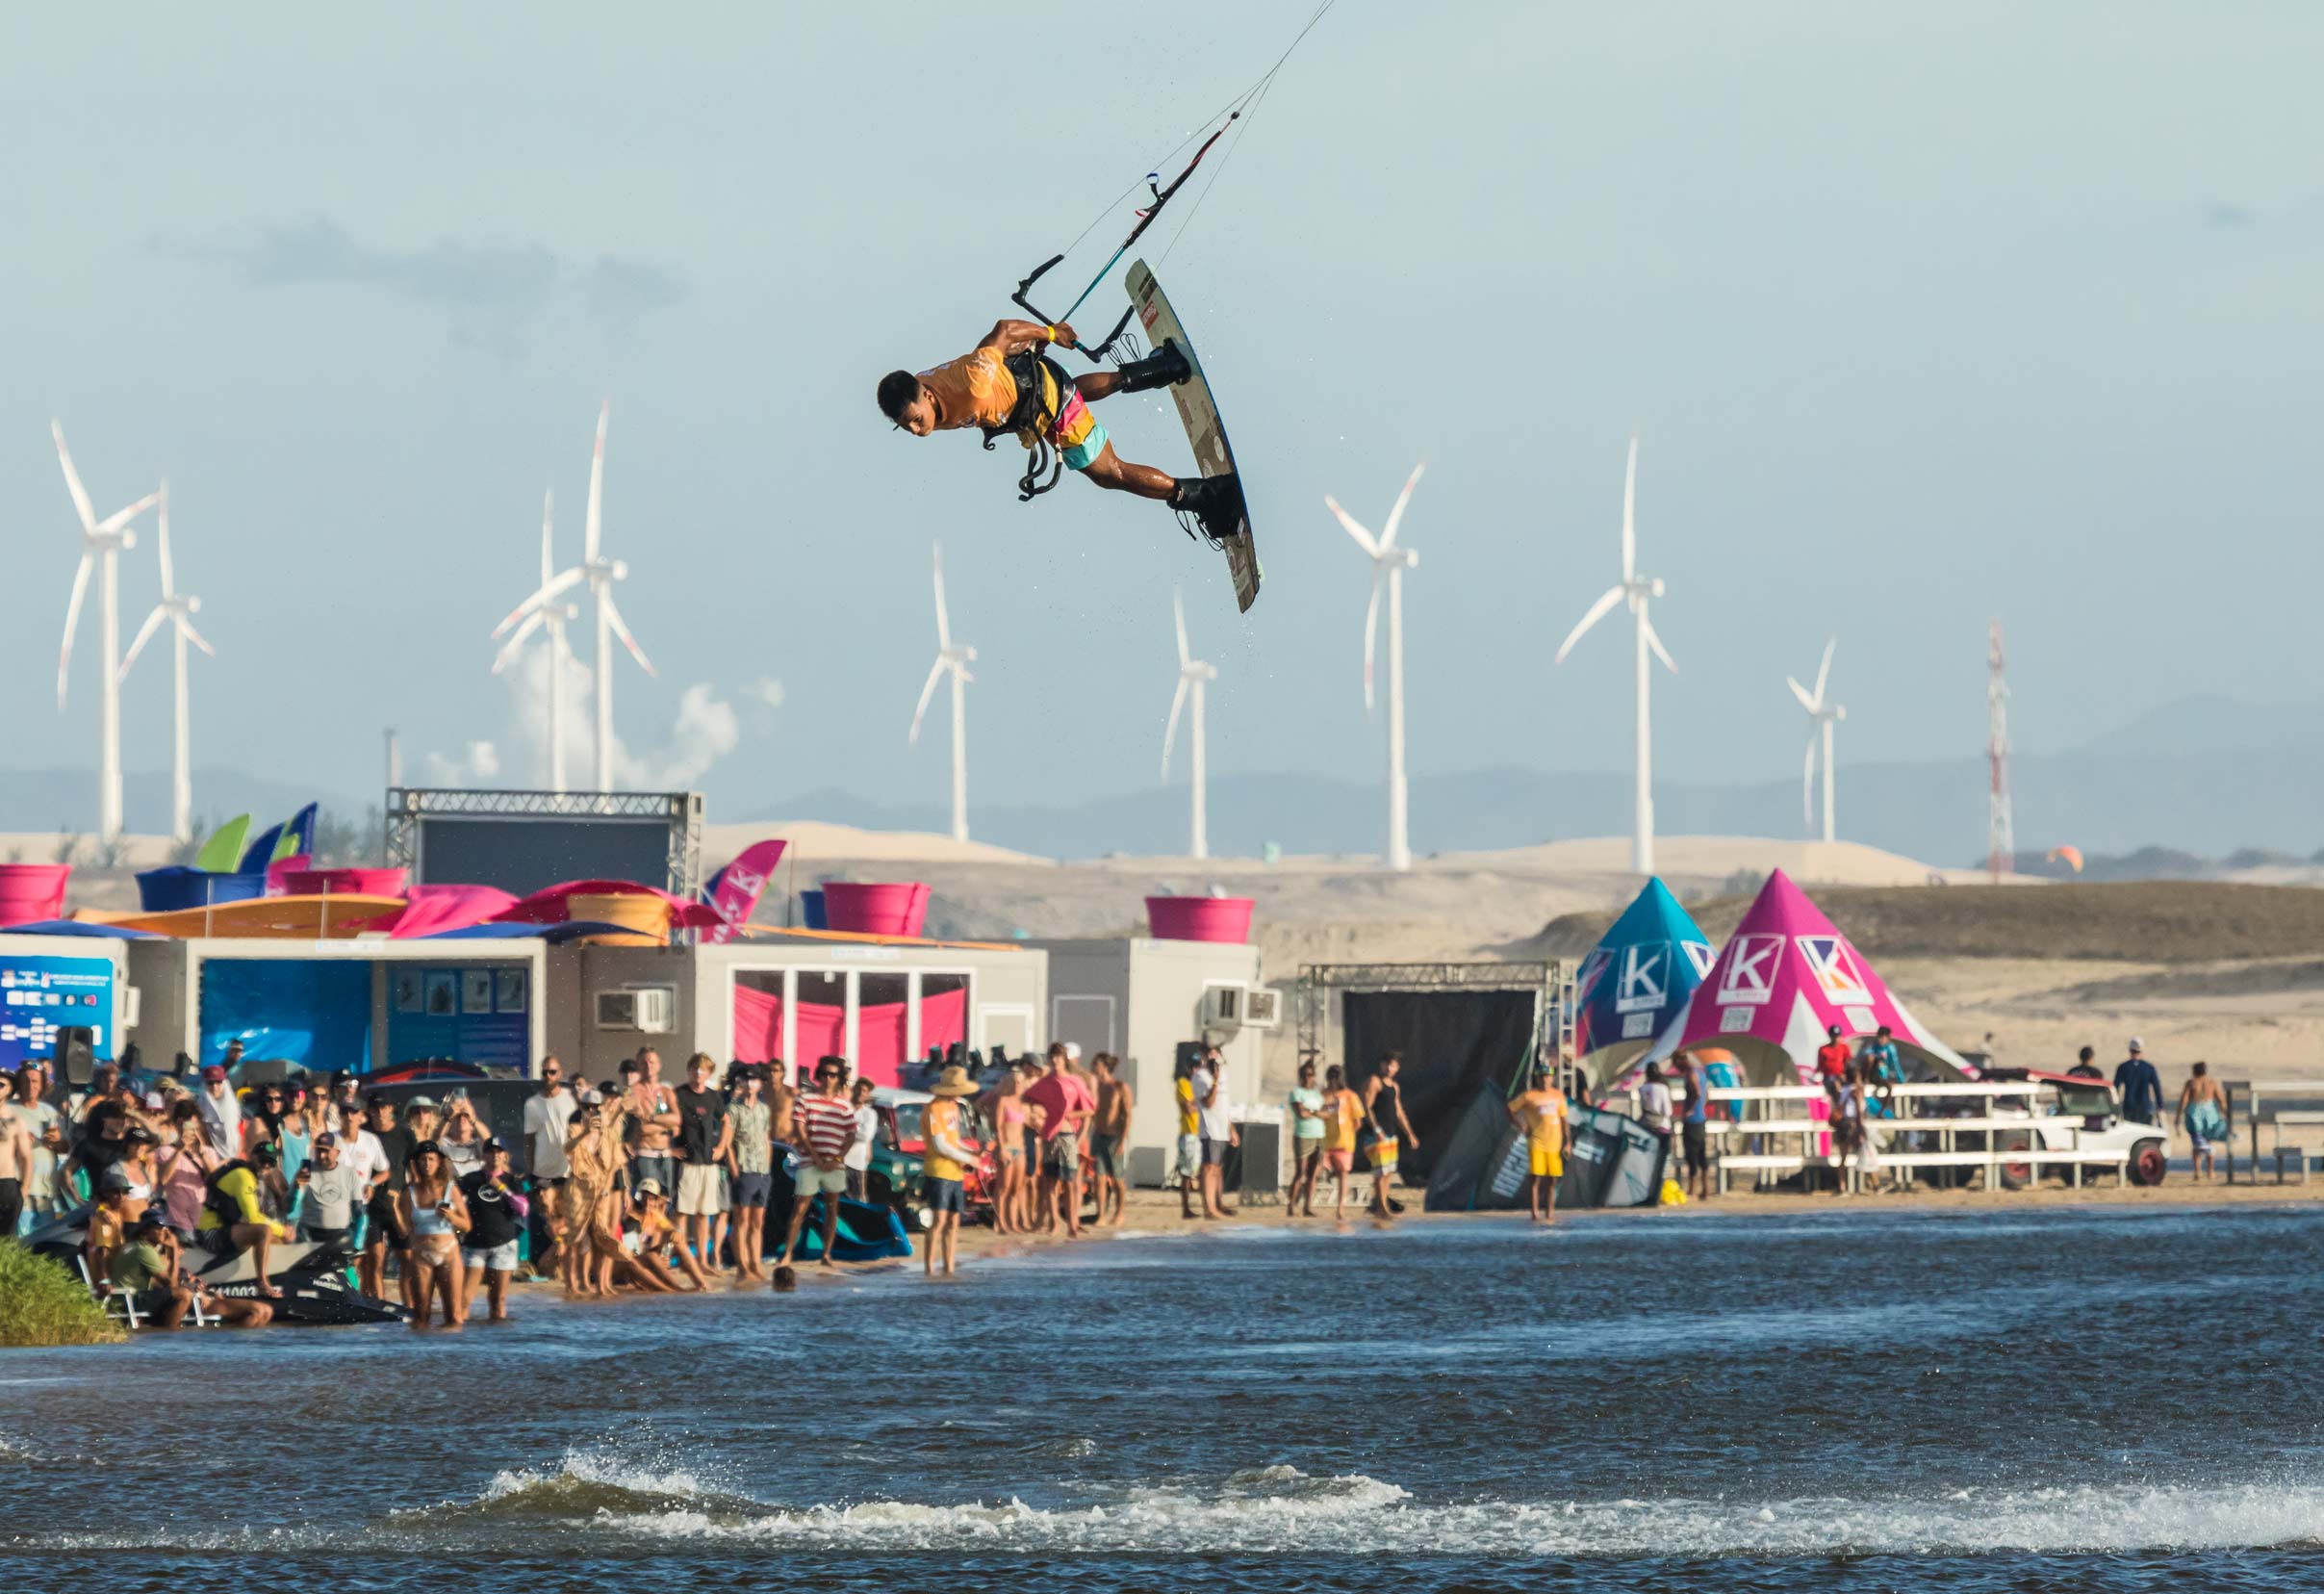 Image for Day One – Copa Kitley GKA Freestyle-Kite World Cup Brazil 2022